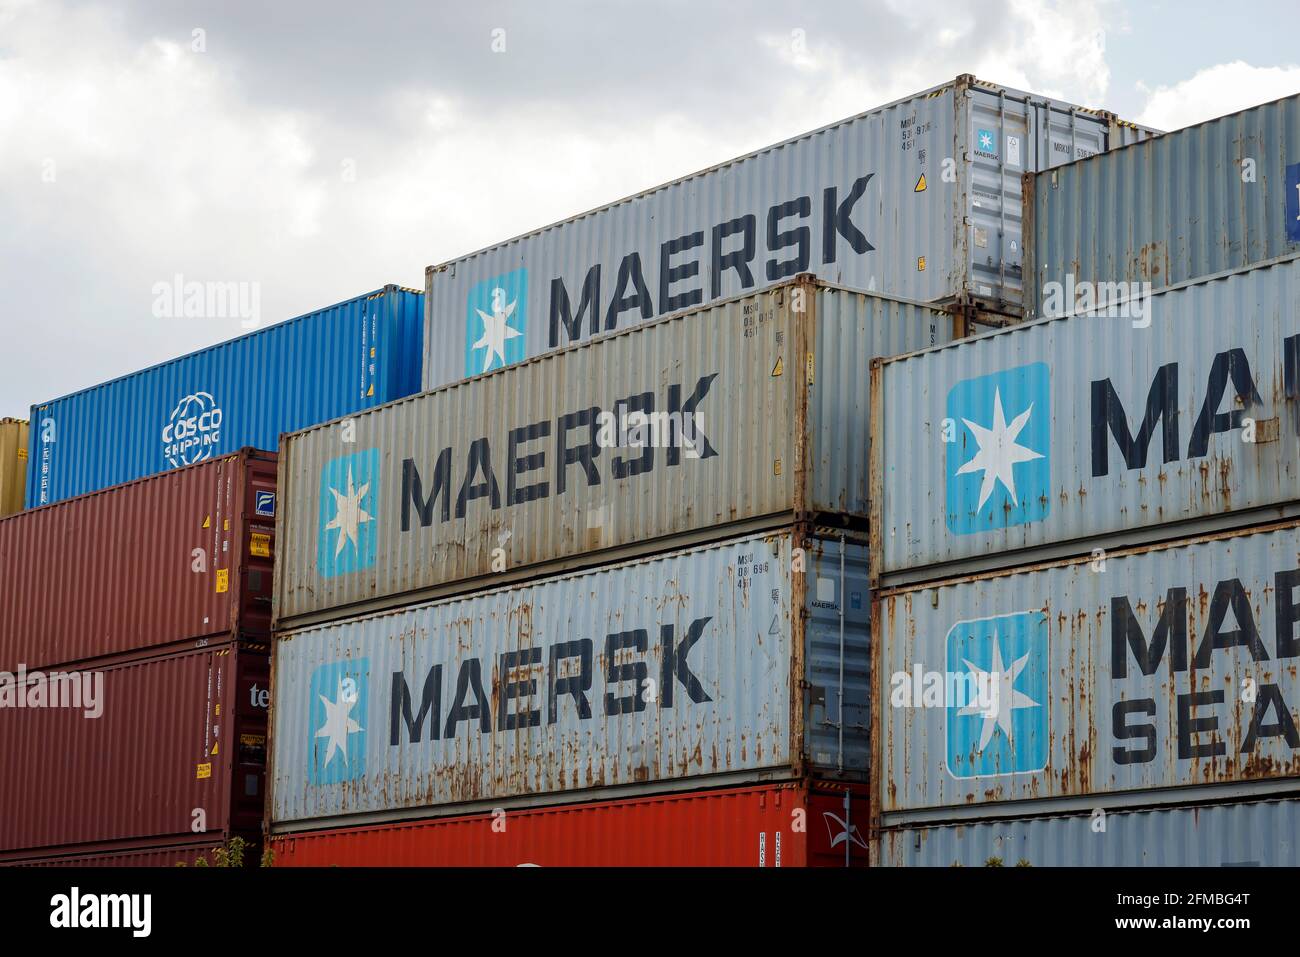 Cologne, North Rhine-Westphalia, Germany - Maersk Container, Maersk Line is the world's largest container ship shipping company, container warehouse at the container terminal, Port of Cologne Niehl. Stock Photo